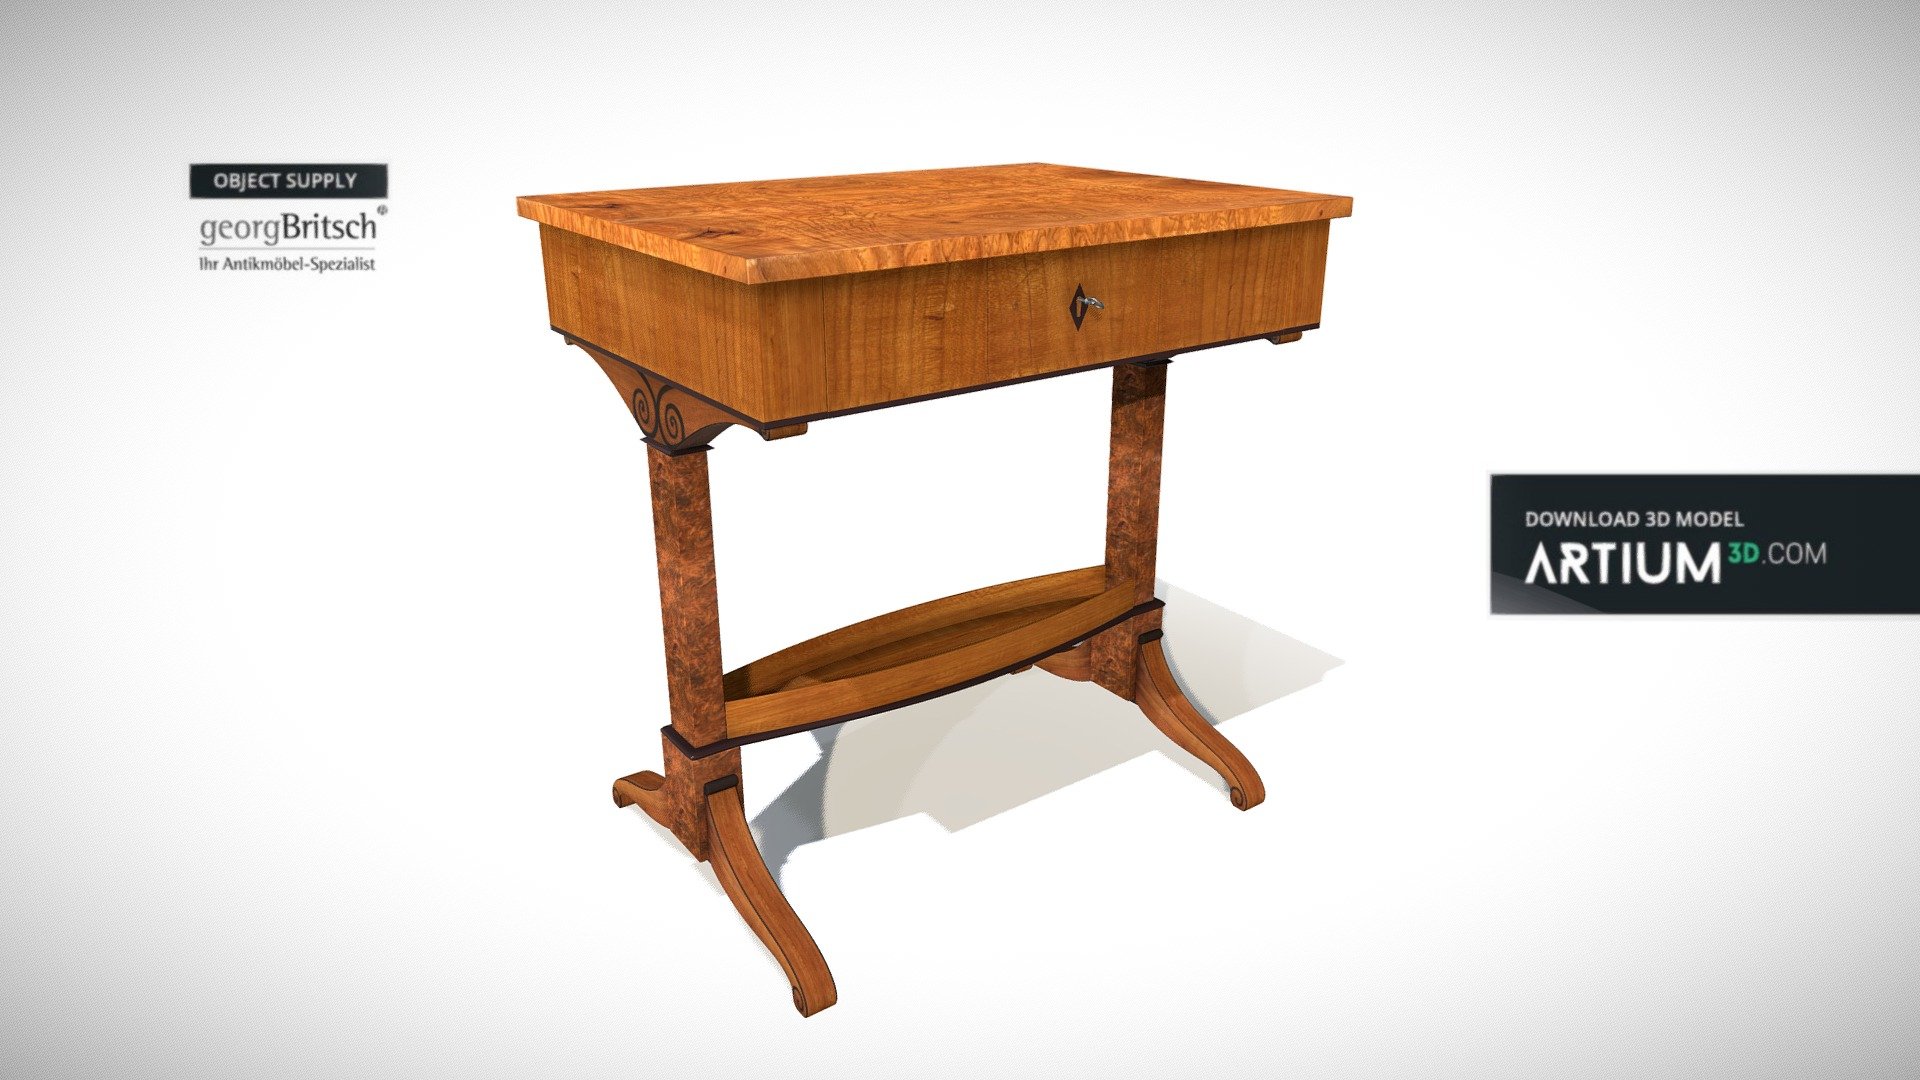 Biedermeier sewing table - Munich, Germany 1820 - Georg Britsch
cherry wood massif and furniture

size: h-77 x w-61 x d-45 cm

code: SK-030 - Biedermeier sewing table - Georg Britsch - Buy Royalty Free 3D model by ARTIUM3D 3d model